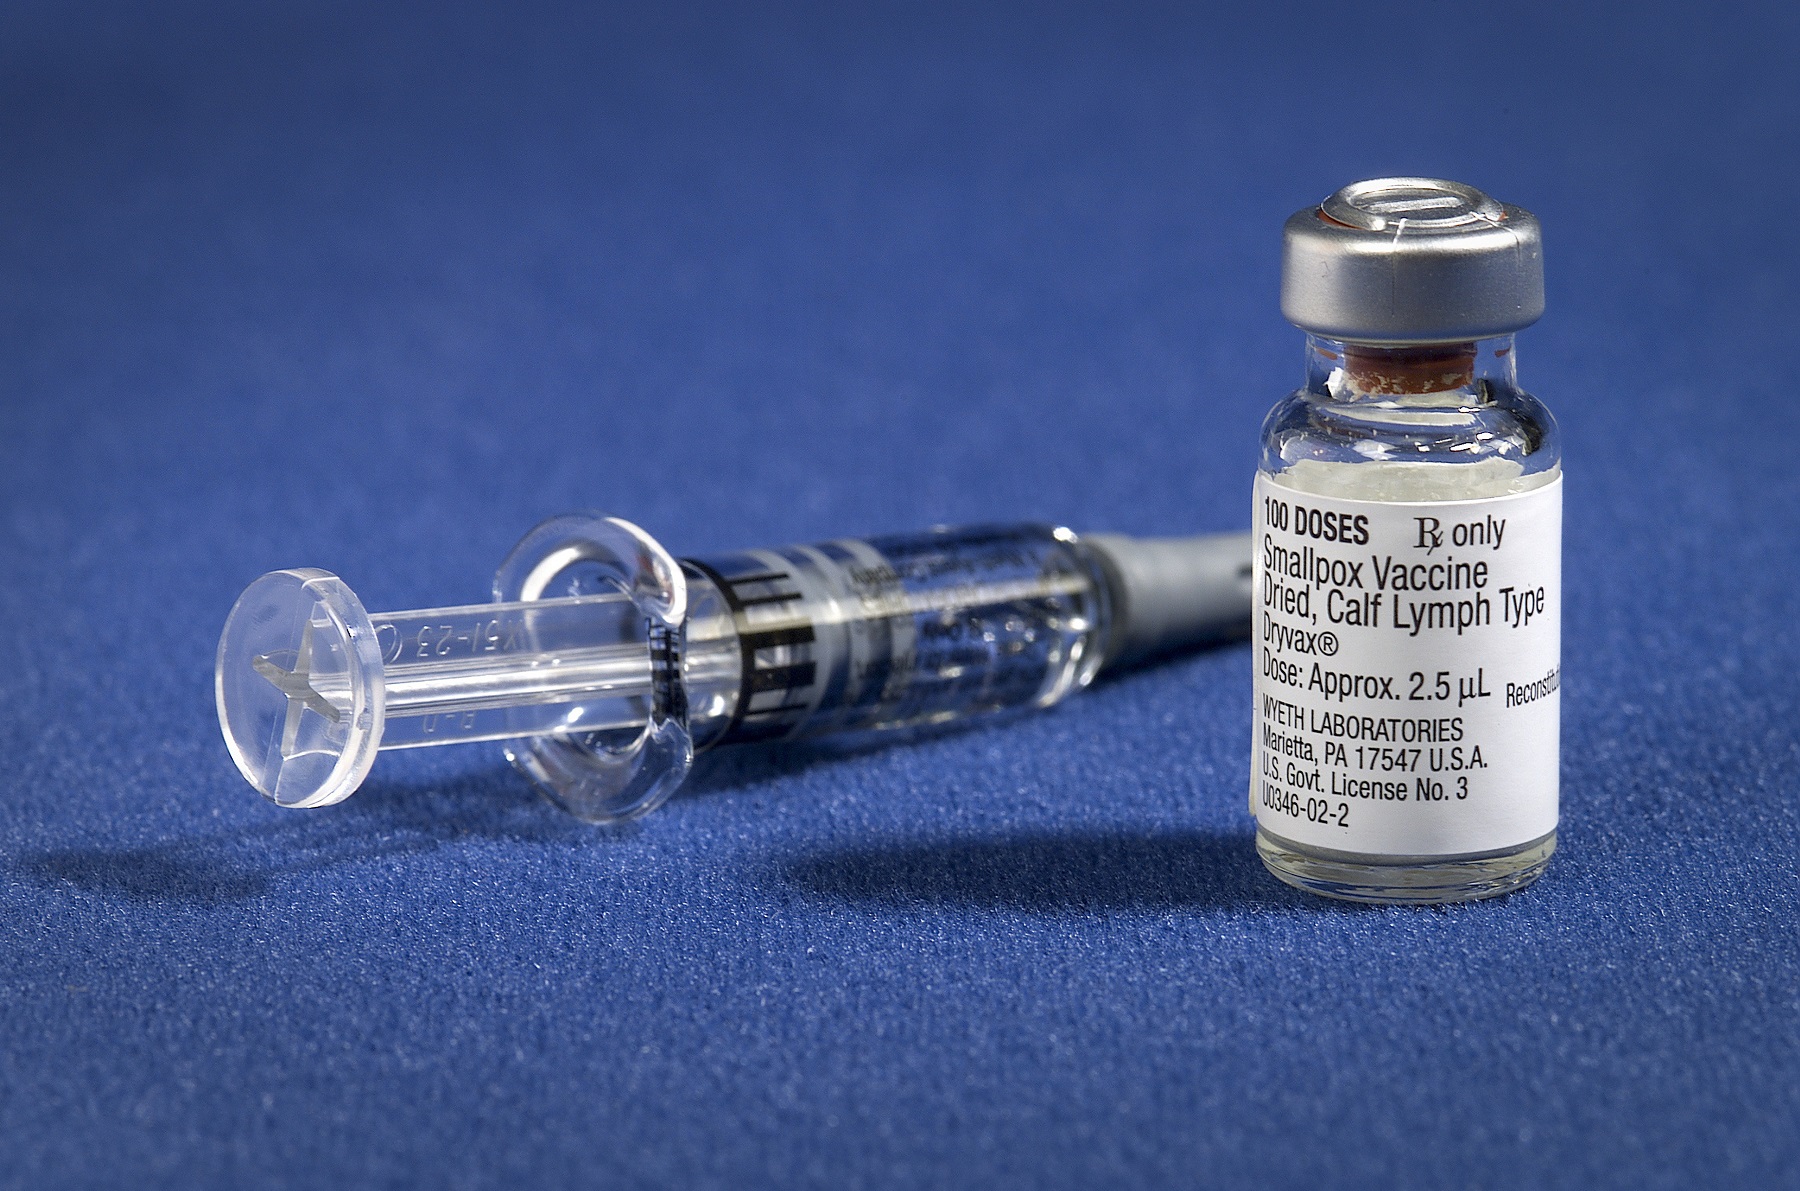 Why did we stop vaccinating against smallpox?